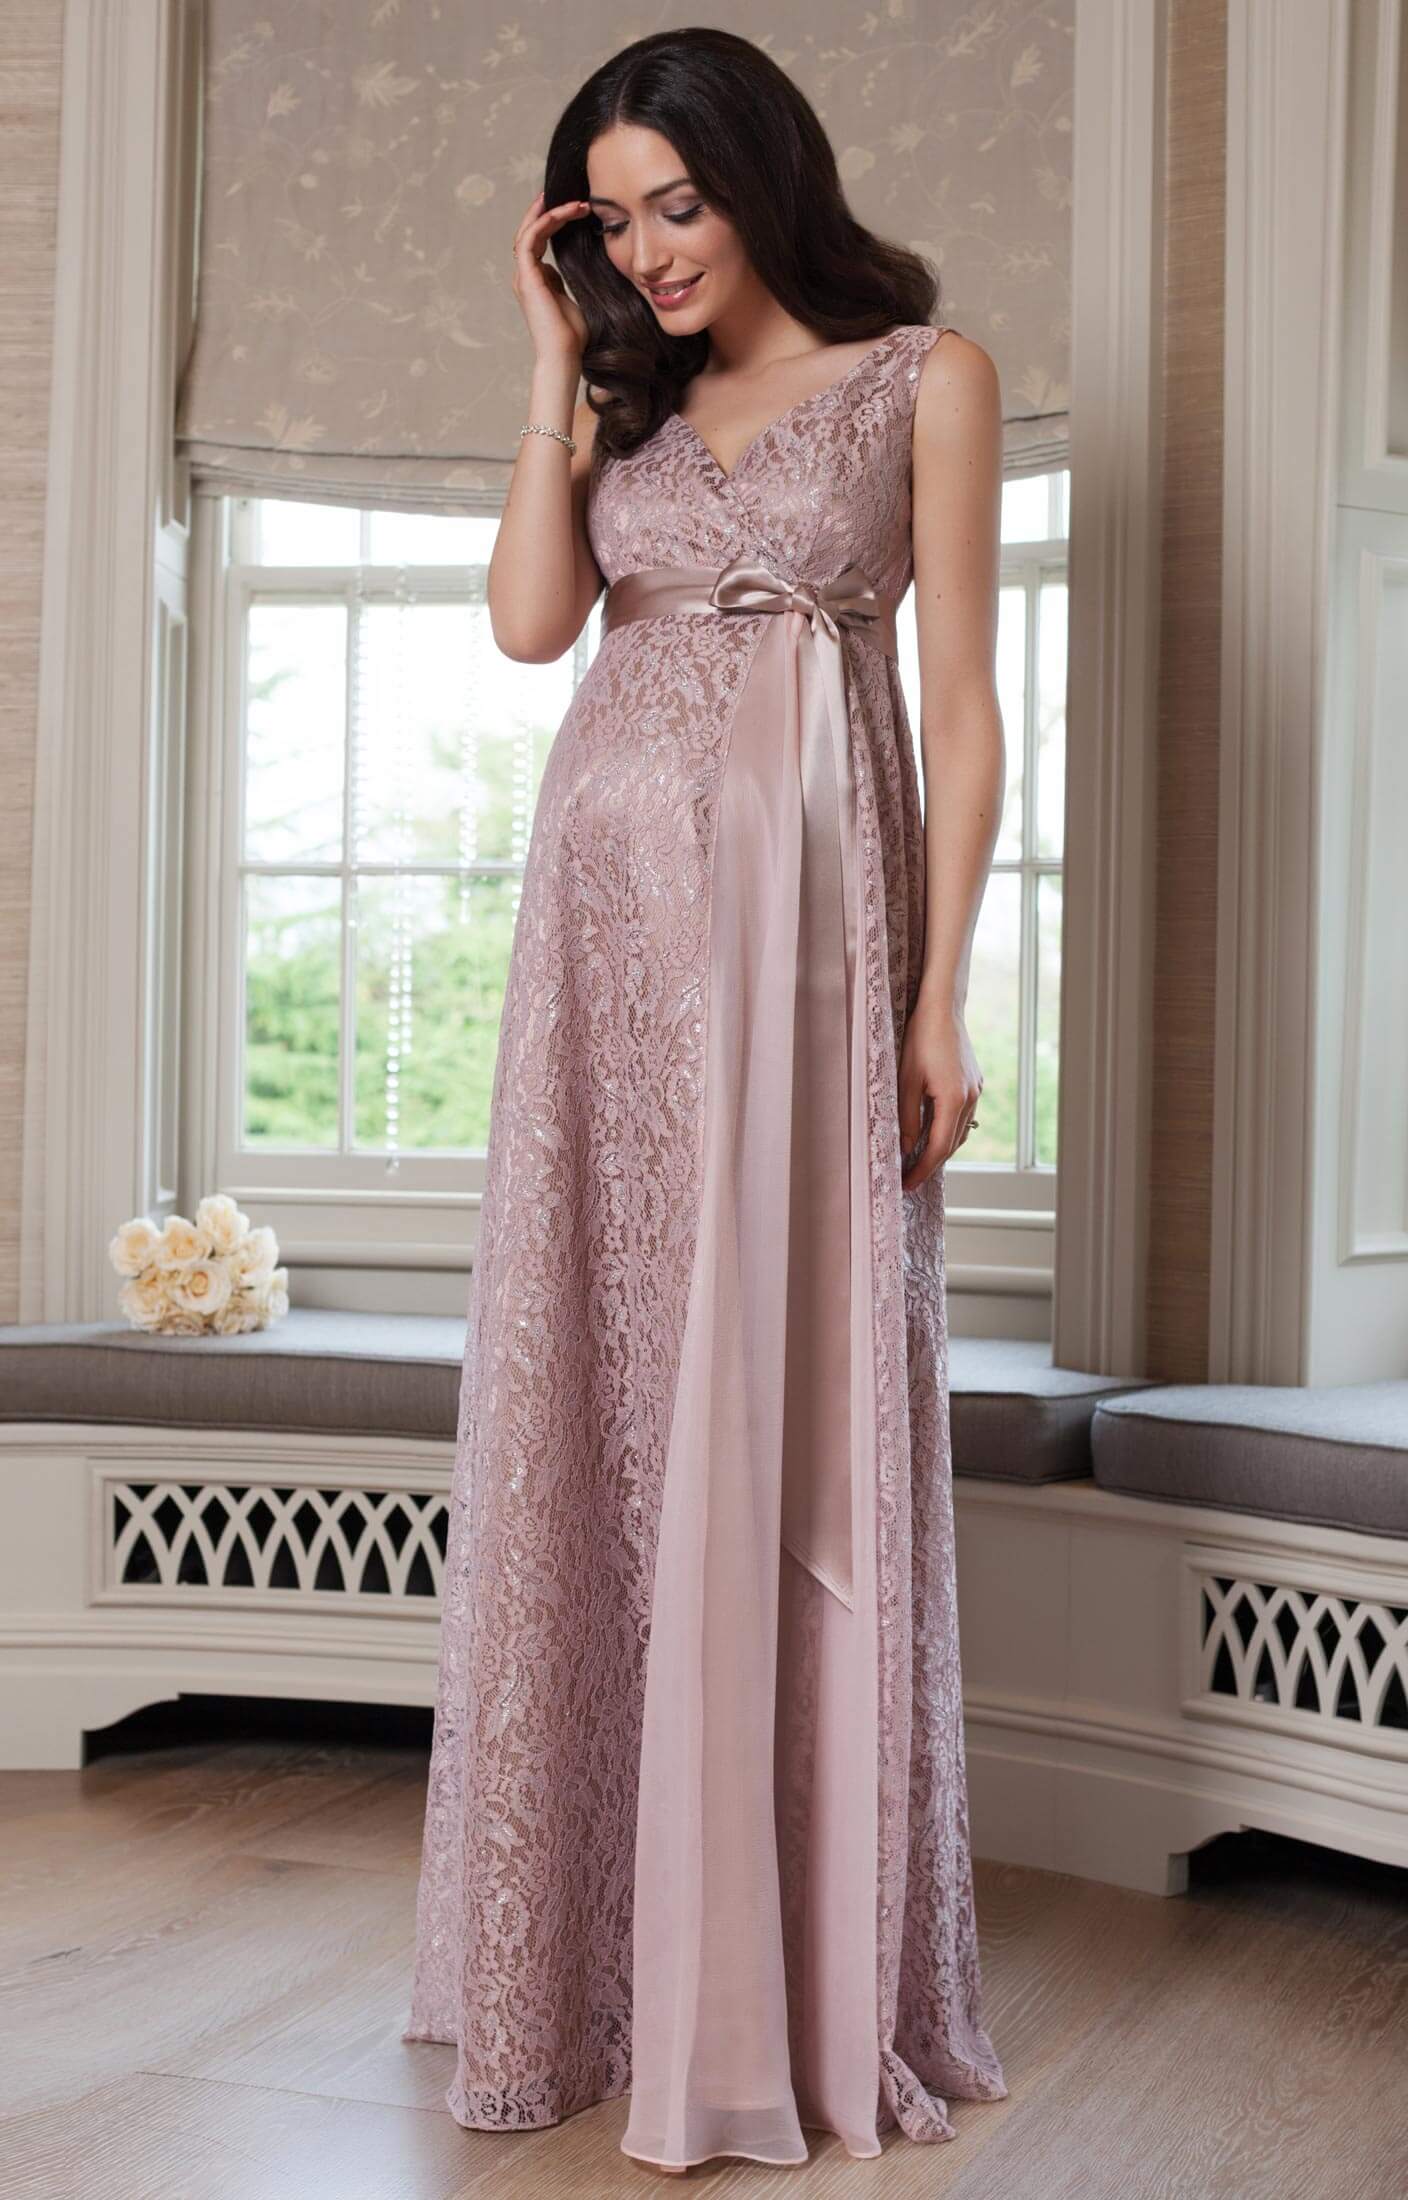 Thea Maternity Gown Long Blush - Maternity Wedding Dresses, Evening